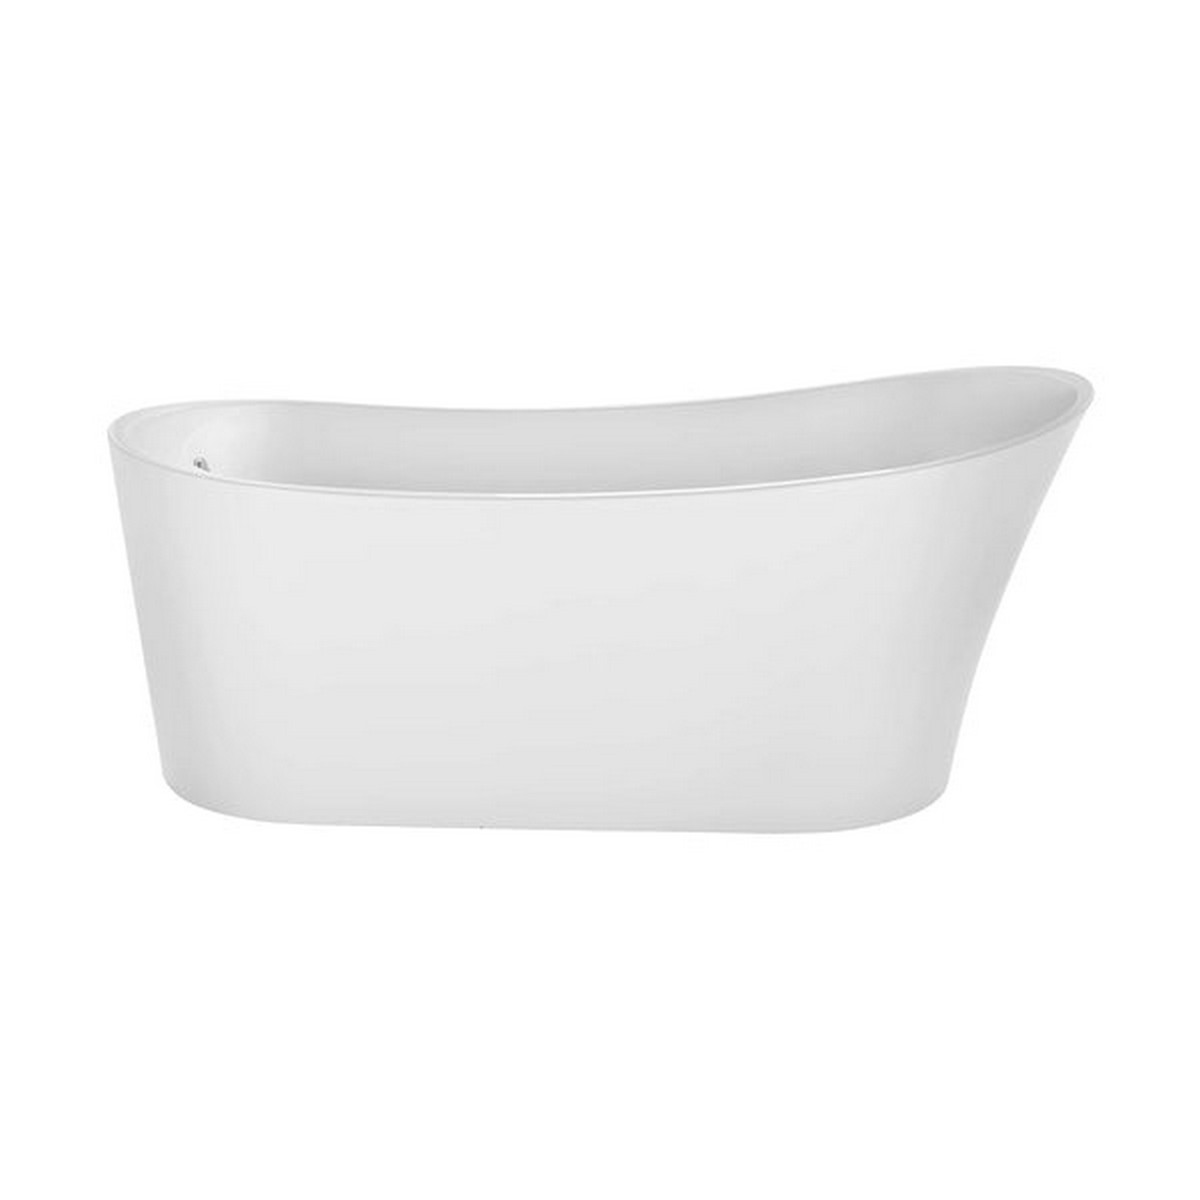 EMPAVA EMPV-67FT1528 66 7/8 X 31 1/2 INCH FREESTANDING OVAL SOAKING BATHTUB WITH LEFT DRAIN IN WHITE